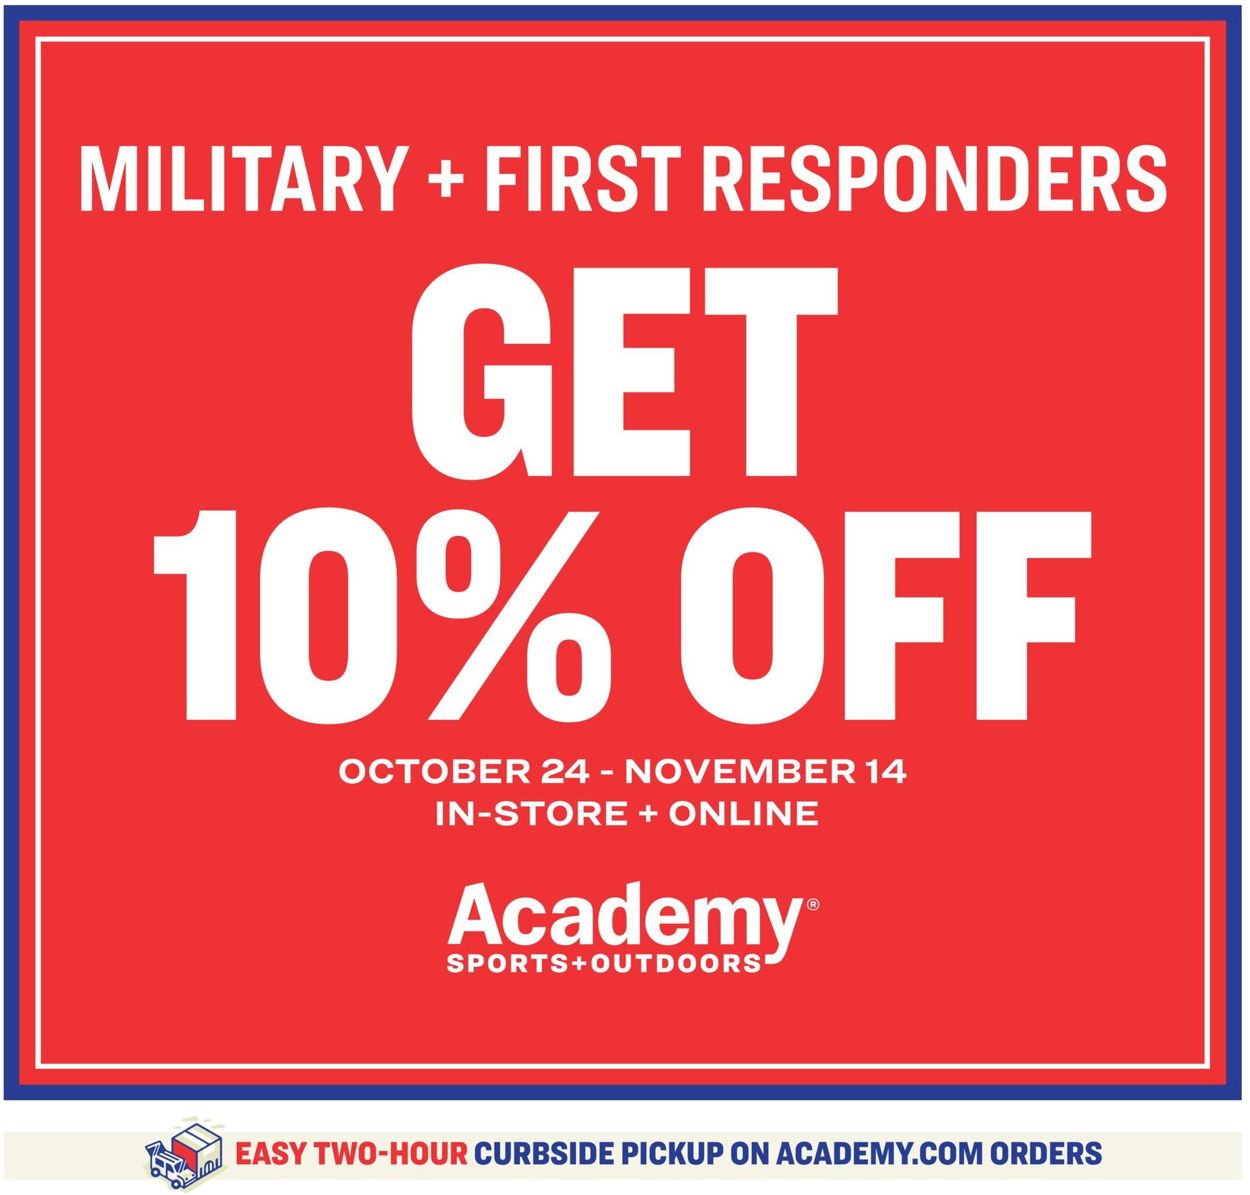 Academy Sports Ad from 10/25/2021